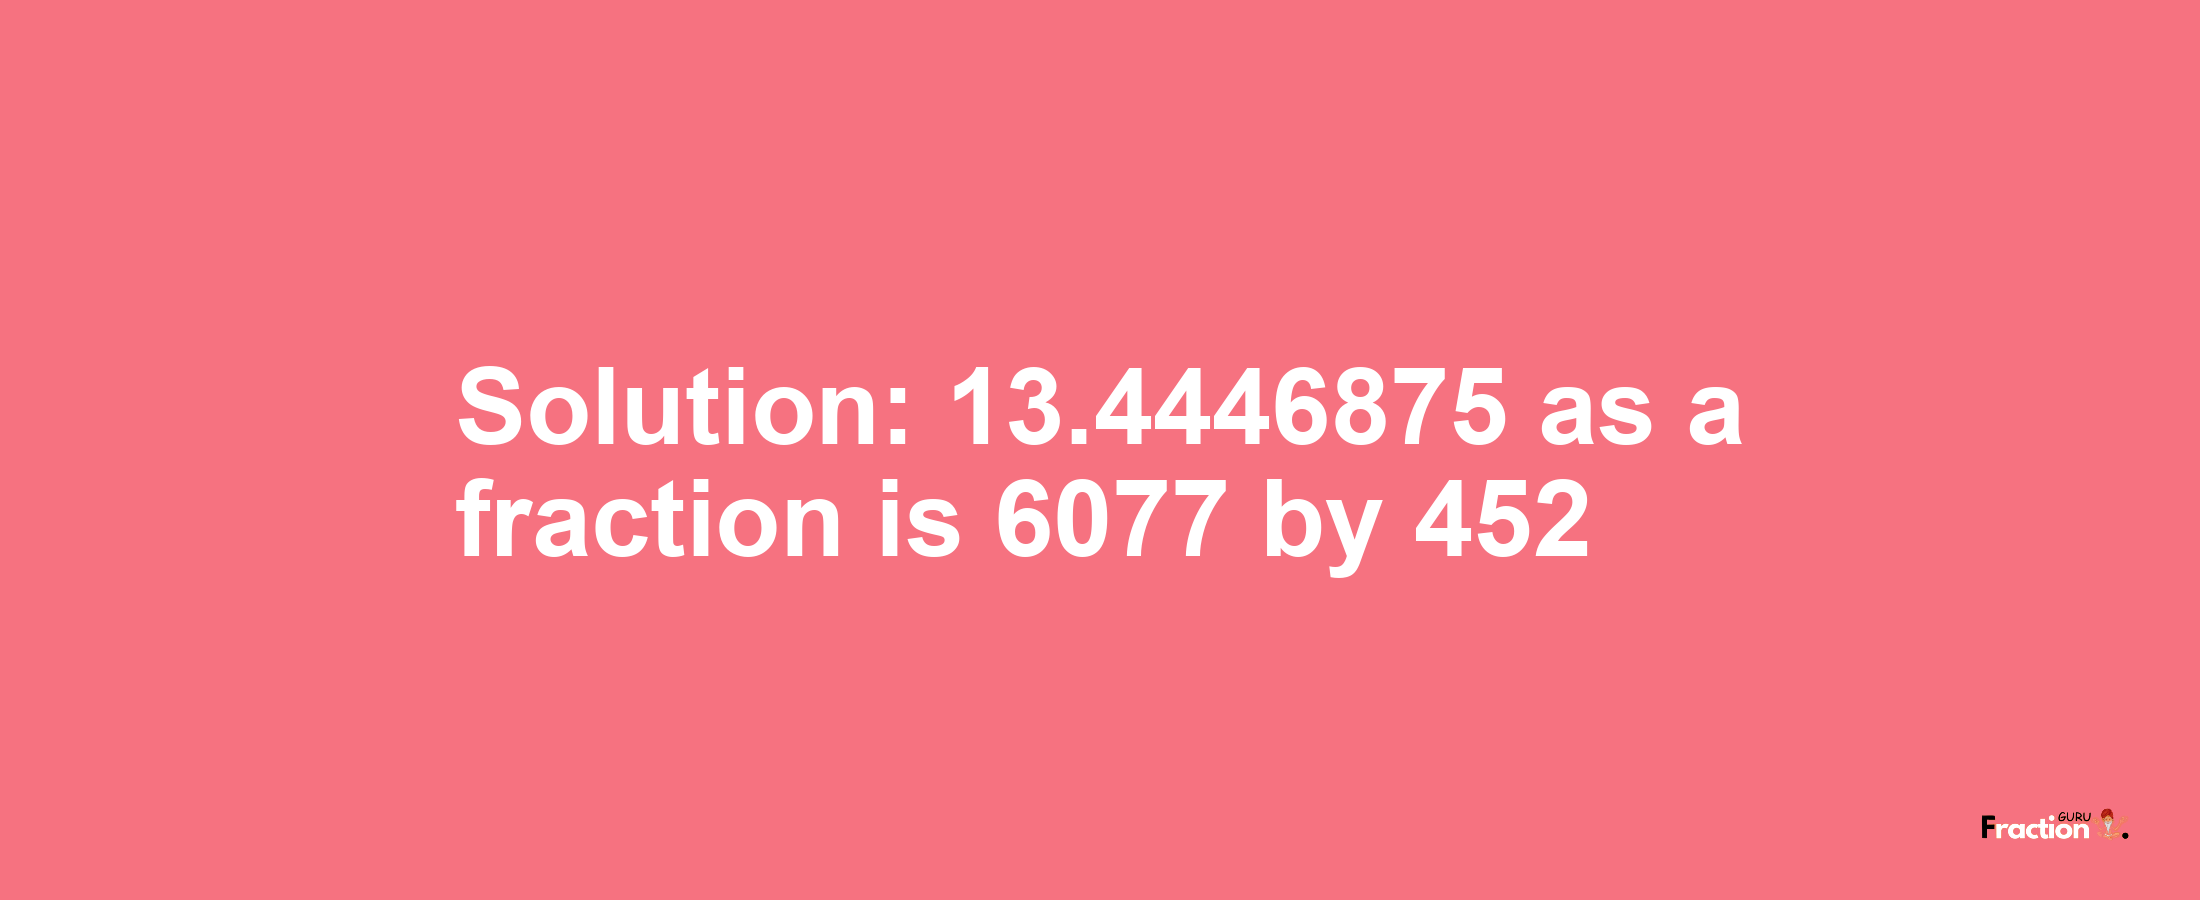 Solution:13.4446875 as a fraction is 6077/452